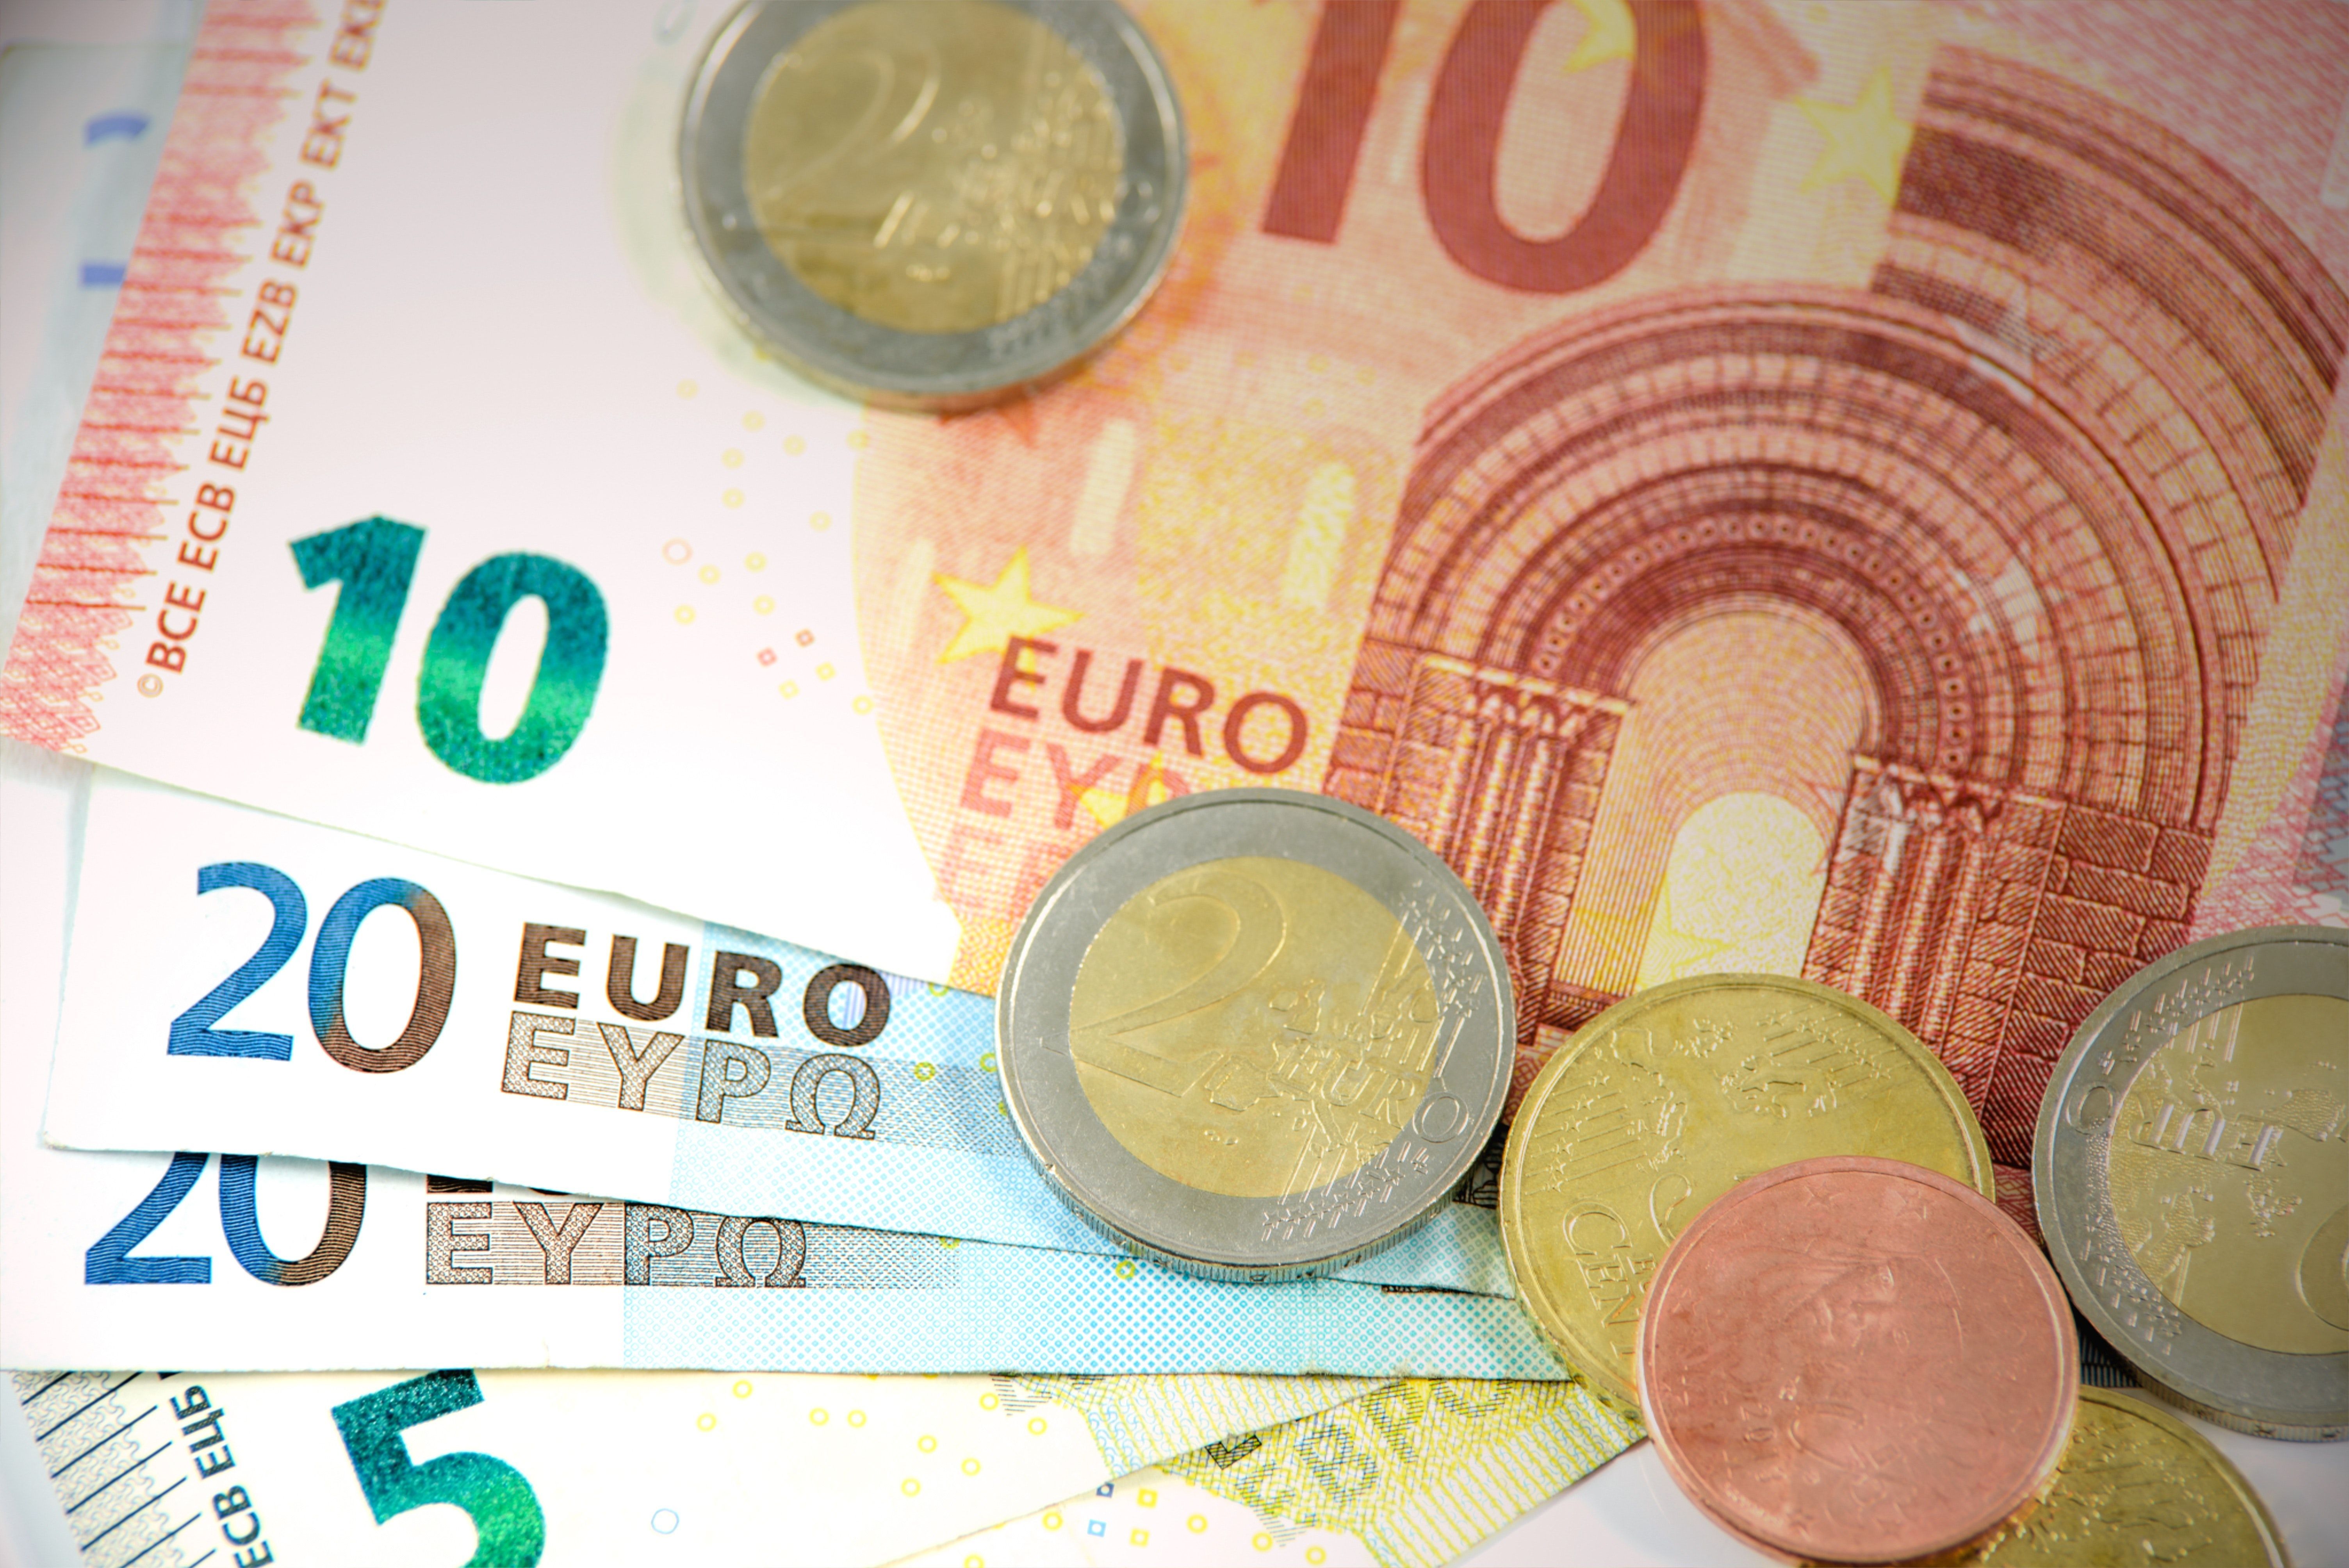 Euro today and Euro blue today: how much it closed at this Friday, March 1